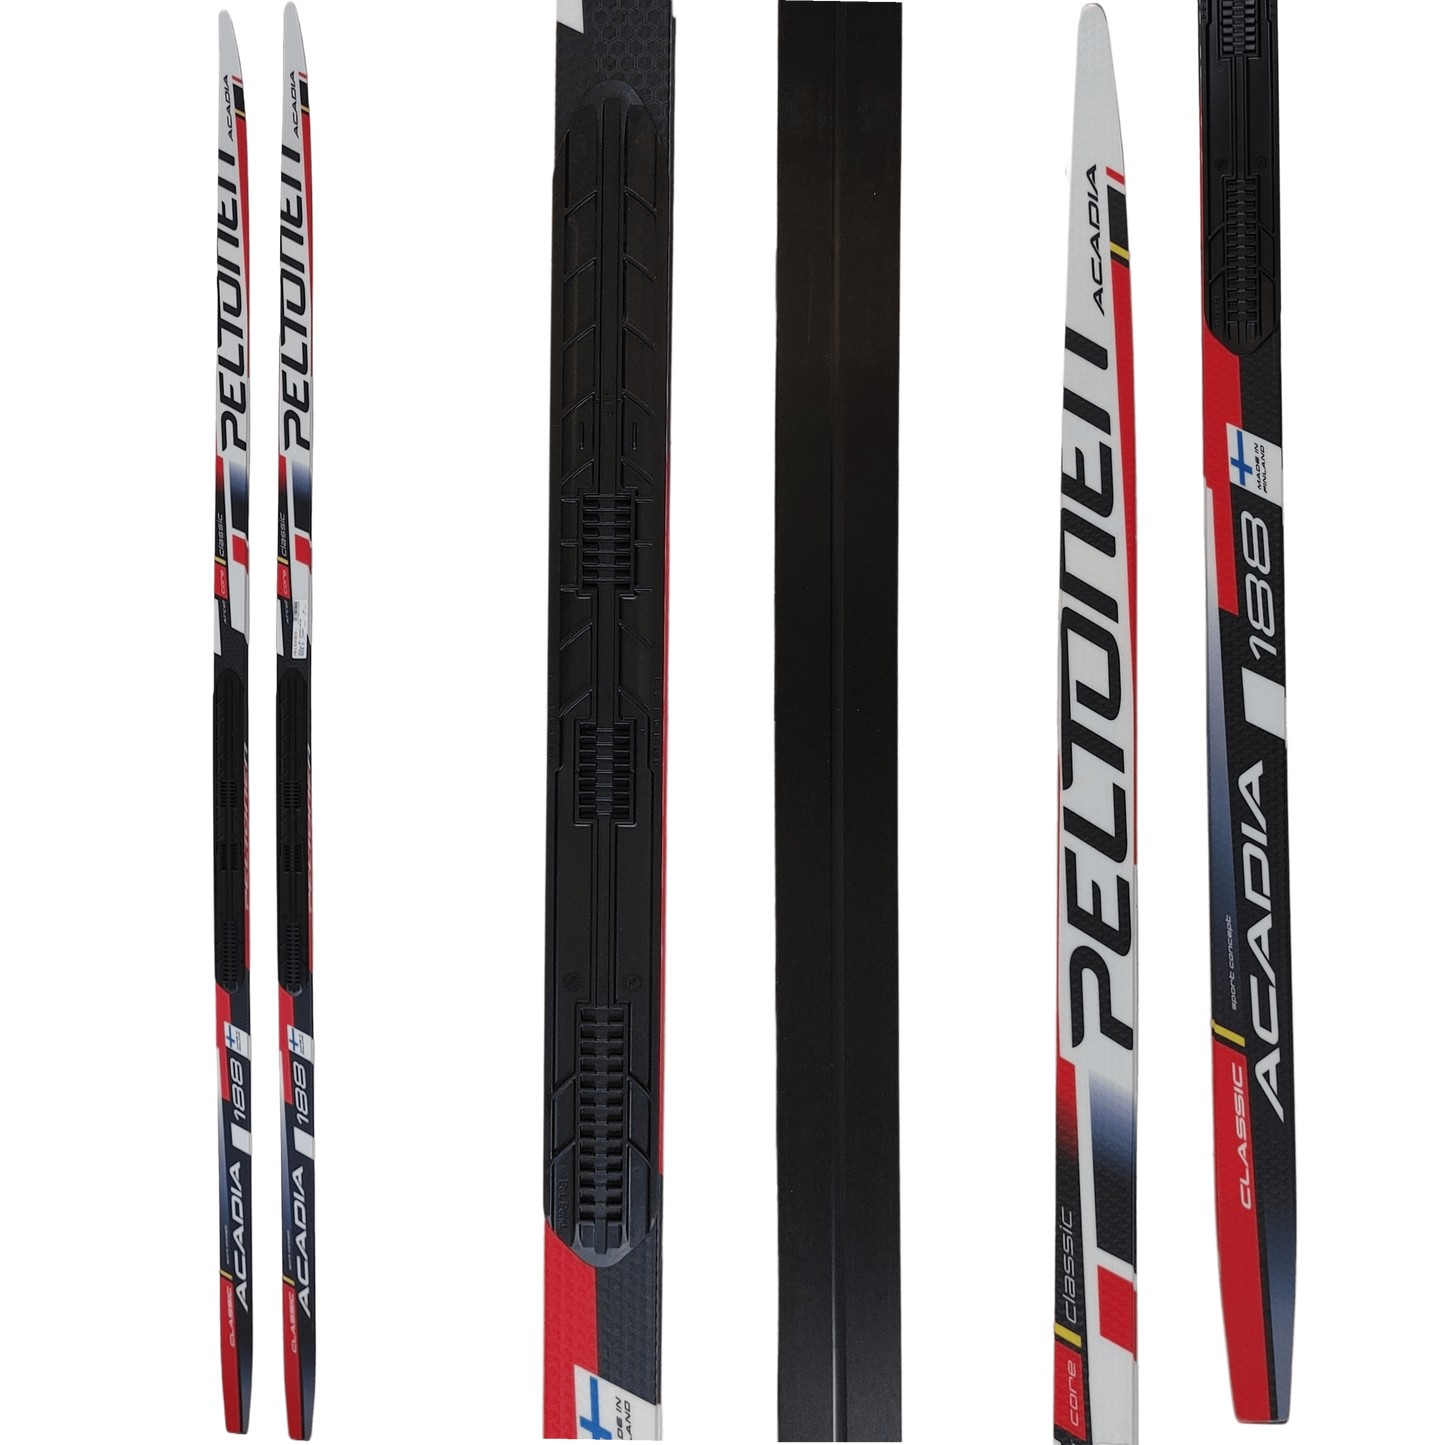 A product picture of the Peltonen ACADIA CAP 2016 Classic Skis B-GRADE MINOR DEFECTS